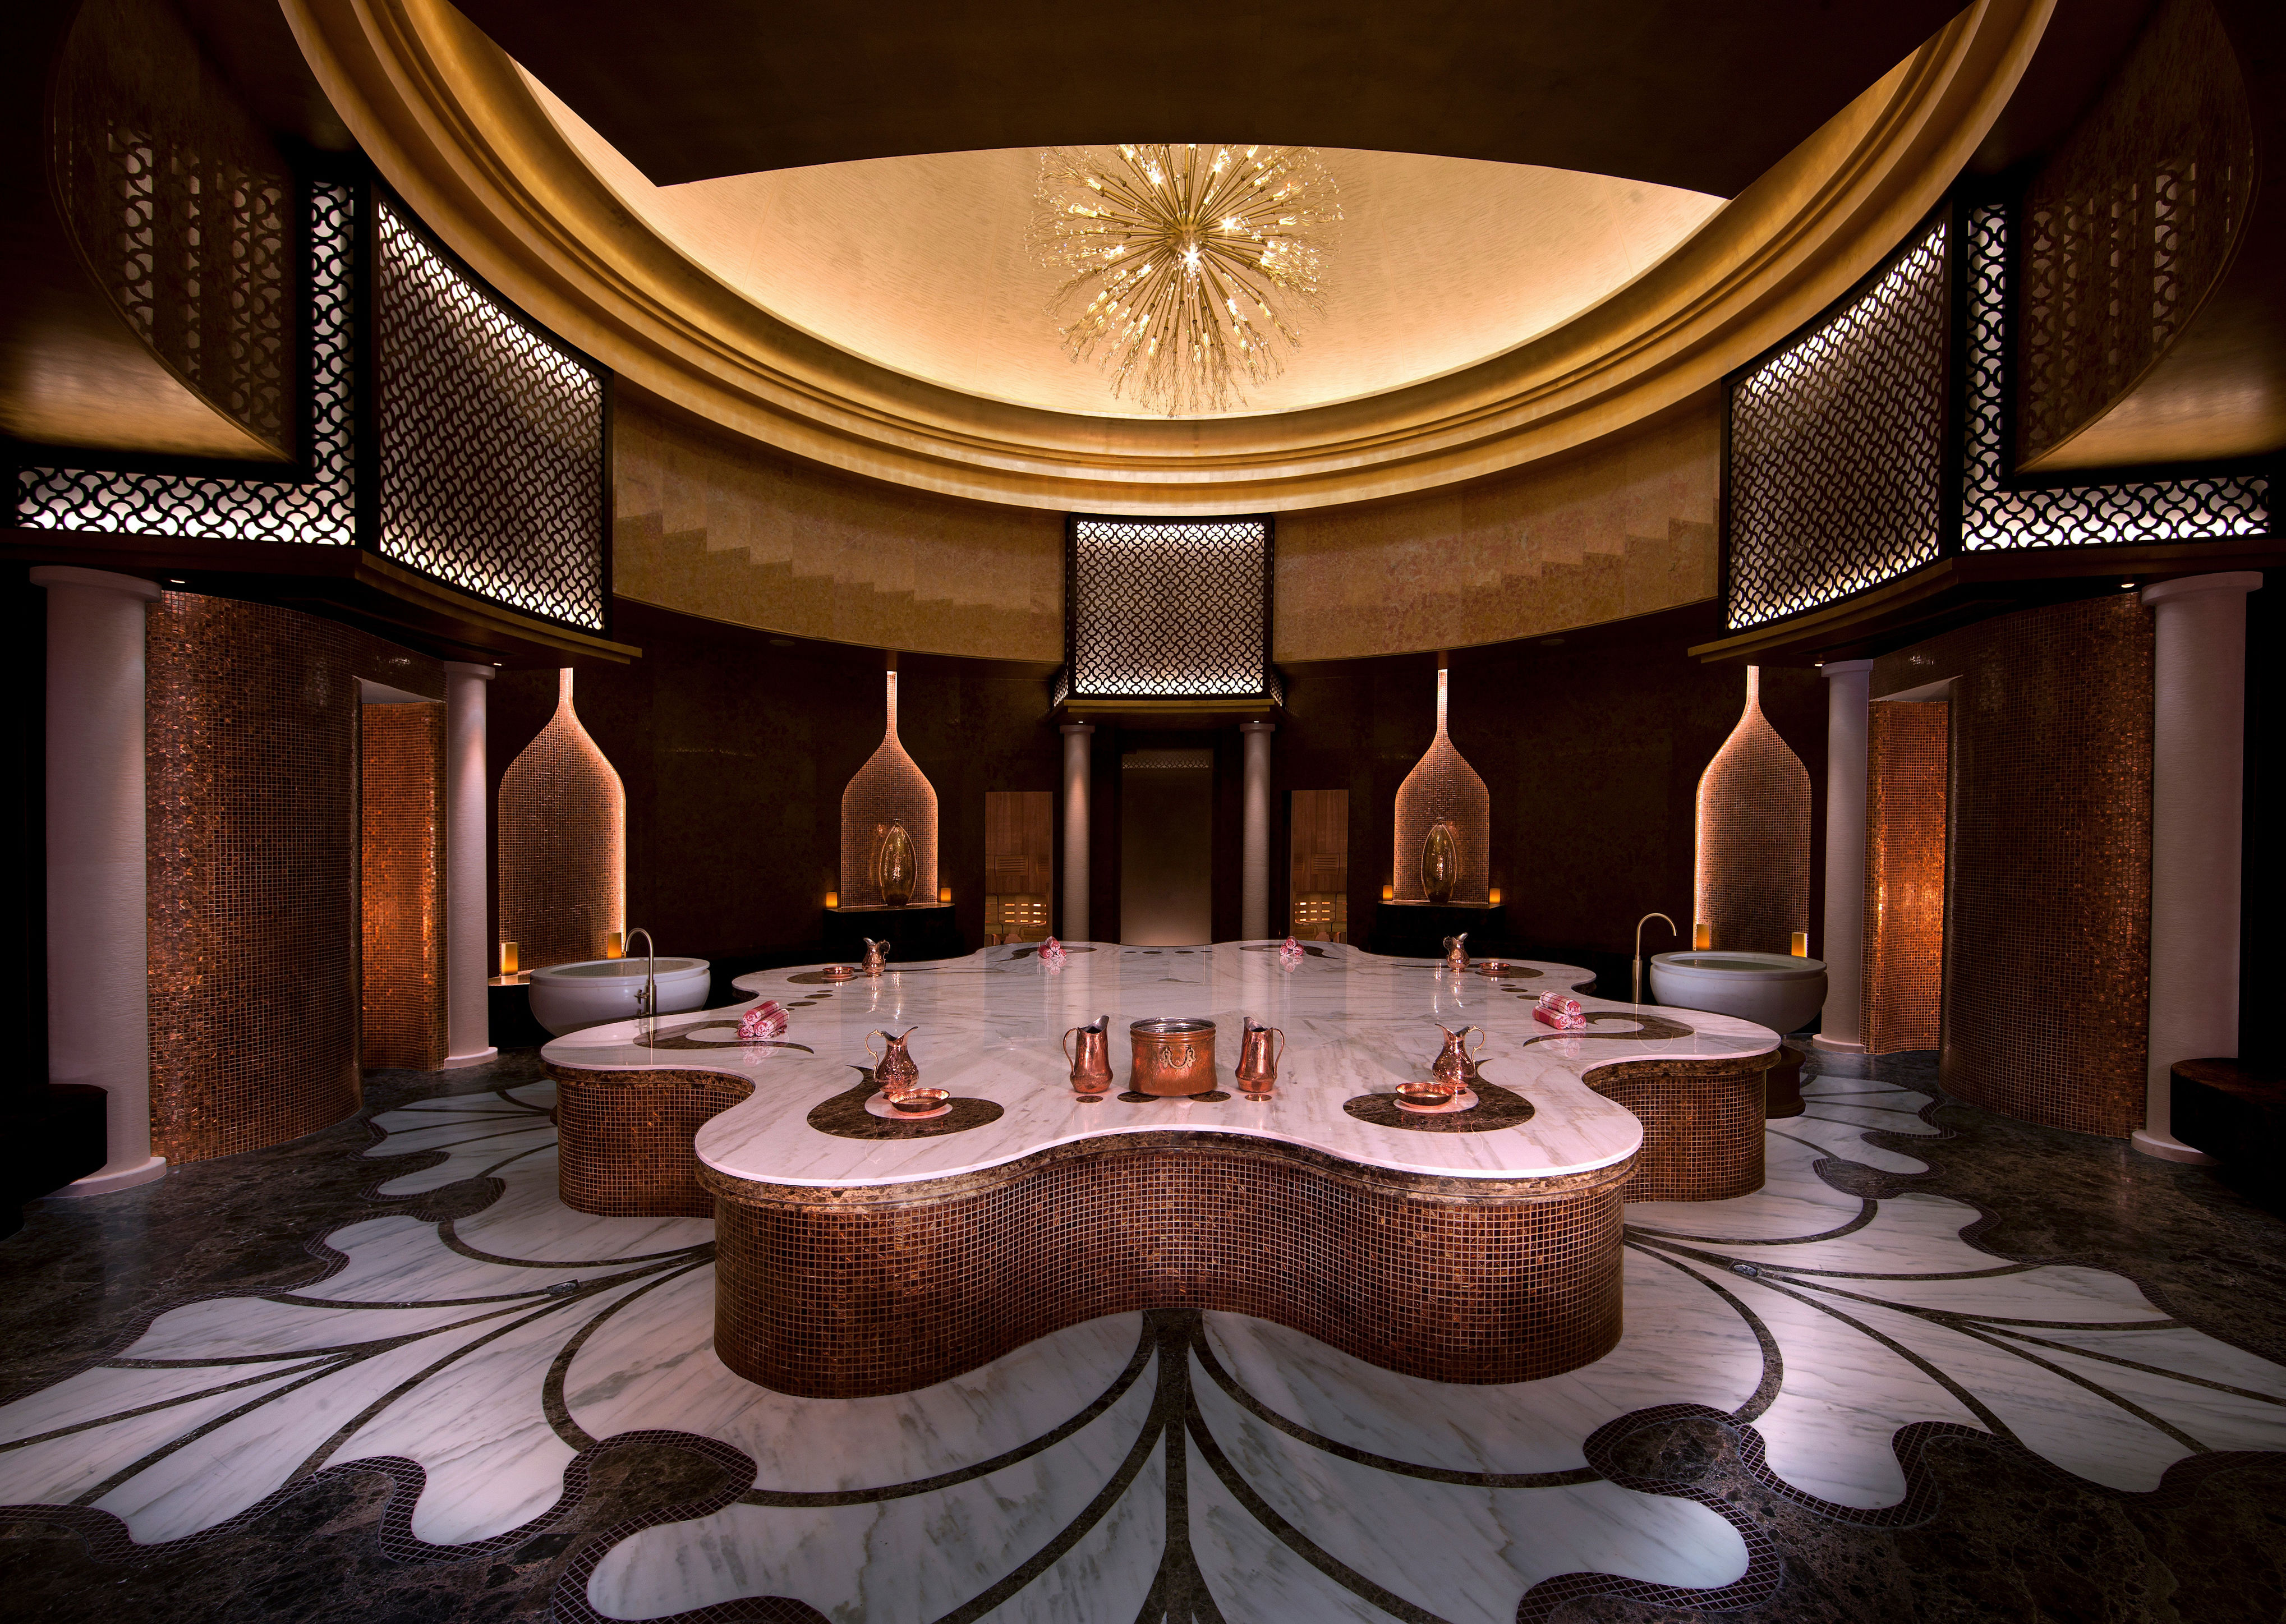 <p>Though the waterfront hotel’s outdoor jacuzzis, serene relaxation rooms, and in-suite soaking tubs offer opulent digs in which to unwind, <a href="https://www.anantara.com/en/eastern-mangroves-abu-dhabi">Anantara Eastern Mangroves</a>’s sumptuous Turkish hammam experience is the undeniable crown jewel of its many spa amenities. A heated marble pedestal, the sides of which are clad in a rich brown mosaic tile, anchors the sanctuary. Guests are guided through a menu of traditional wellness rituals by hammam specialists, including kese mitt exfoliation, honey face masks, and olive oil massages.</p> <div class="callout"><p><a href="https://www.expedia.com/Abu-Dhabi-Hotels-Anantara-Eastern-Mangroves-Abu-Dhabi-Hotel.h4921123.Hotel-Information" title="Book now at Expedia.com">Book now at Expedia.com</a></p> </div><p>Sign up for our newsletter to get the latest in design, decorating, celebrity style, shopping, and more.</p><a href="https://www.architecturaldigest.com/newsletter/subscribe?sourceCode=msnsend">Sign Up Now</a>